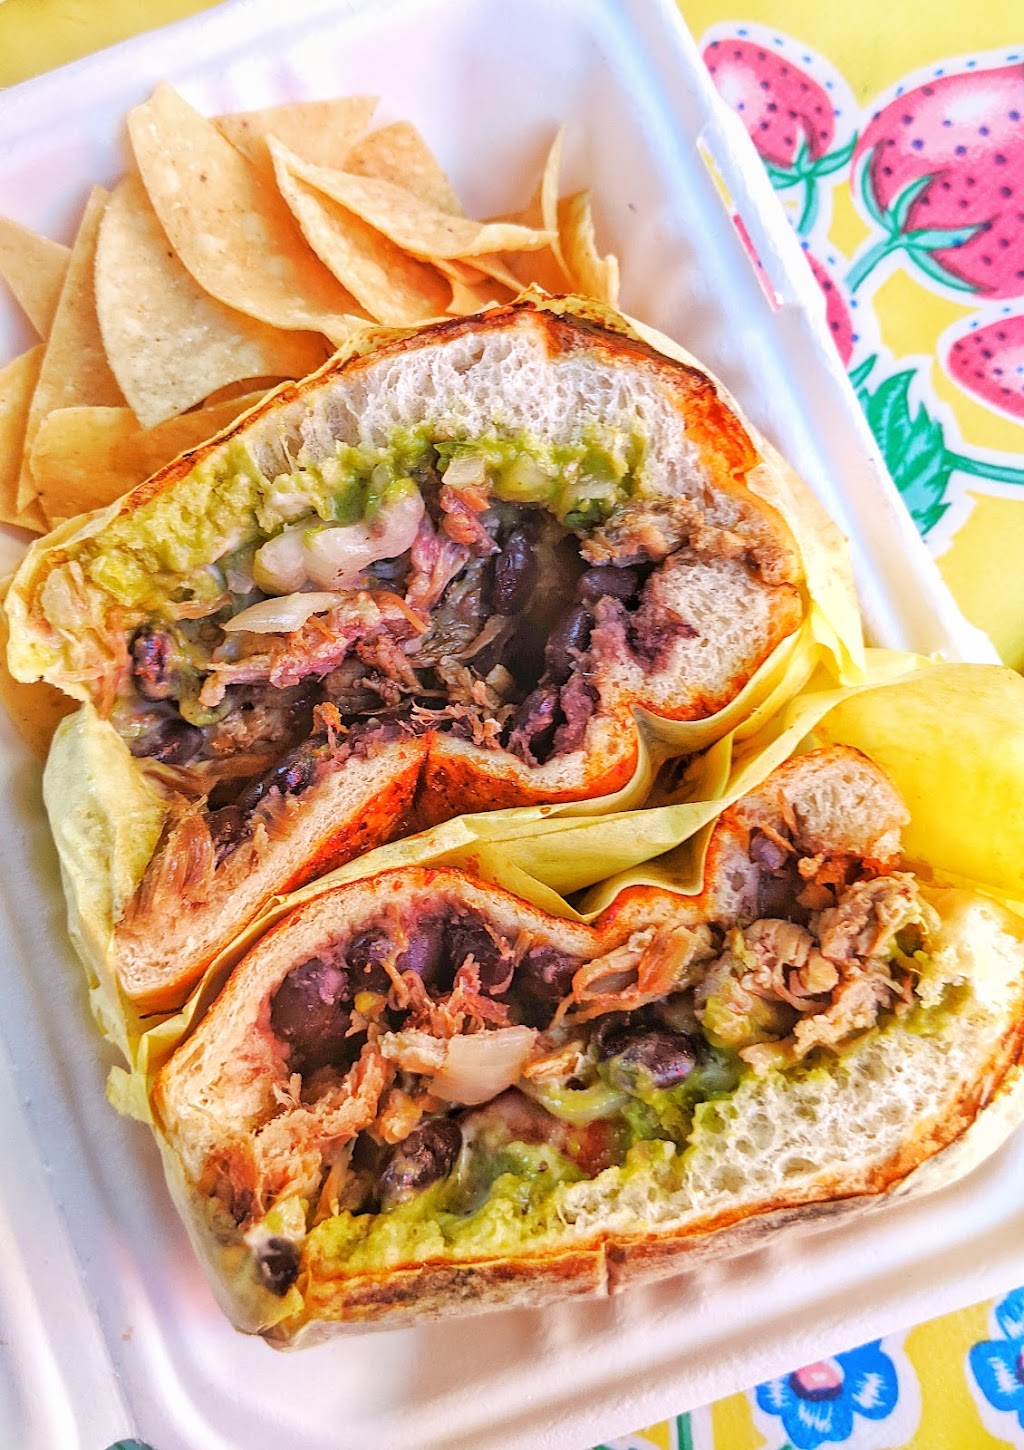 Hugos Tacos | 4749 Coldwater Canyon Ave, Studio City, CA 91604 | Phone: (818) 762-7771